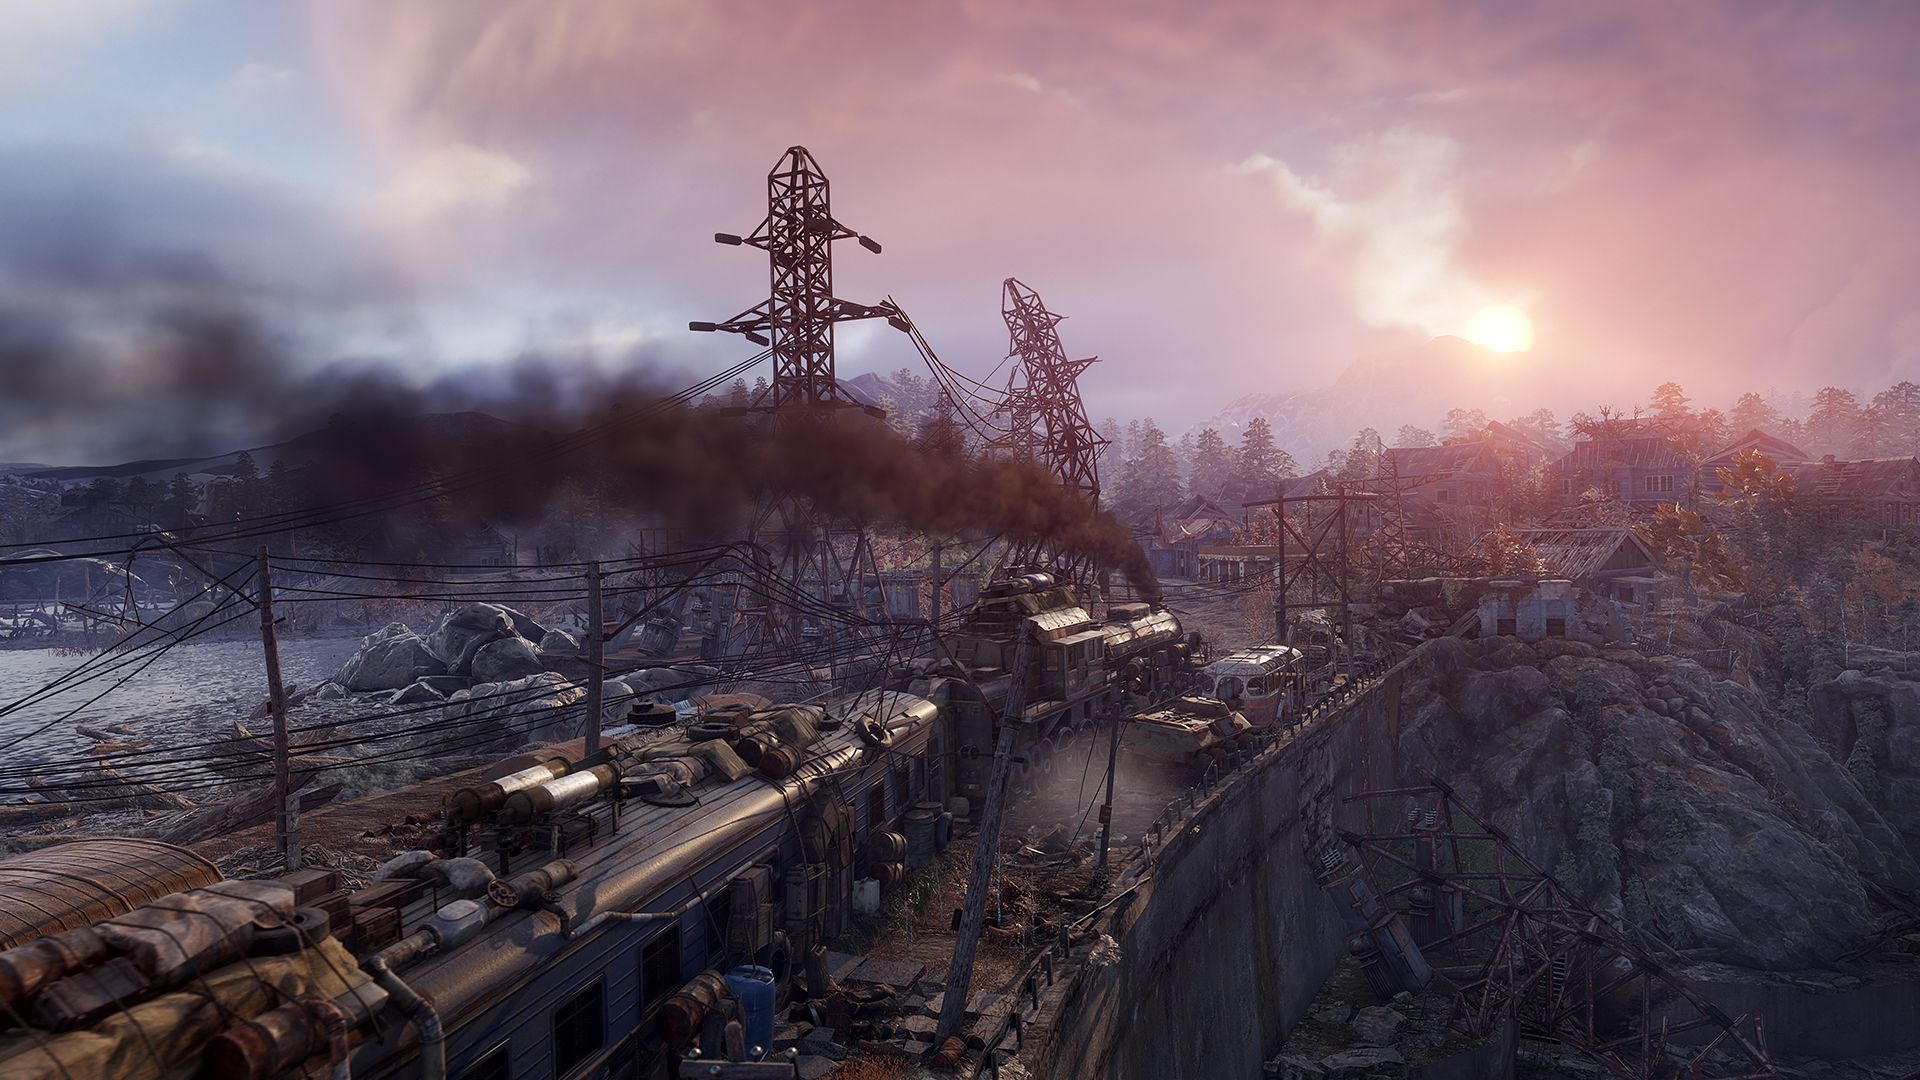 The train in Metro Exodus travelling through an abandoned village at sundown